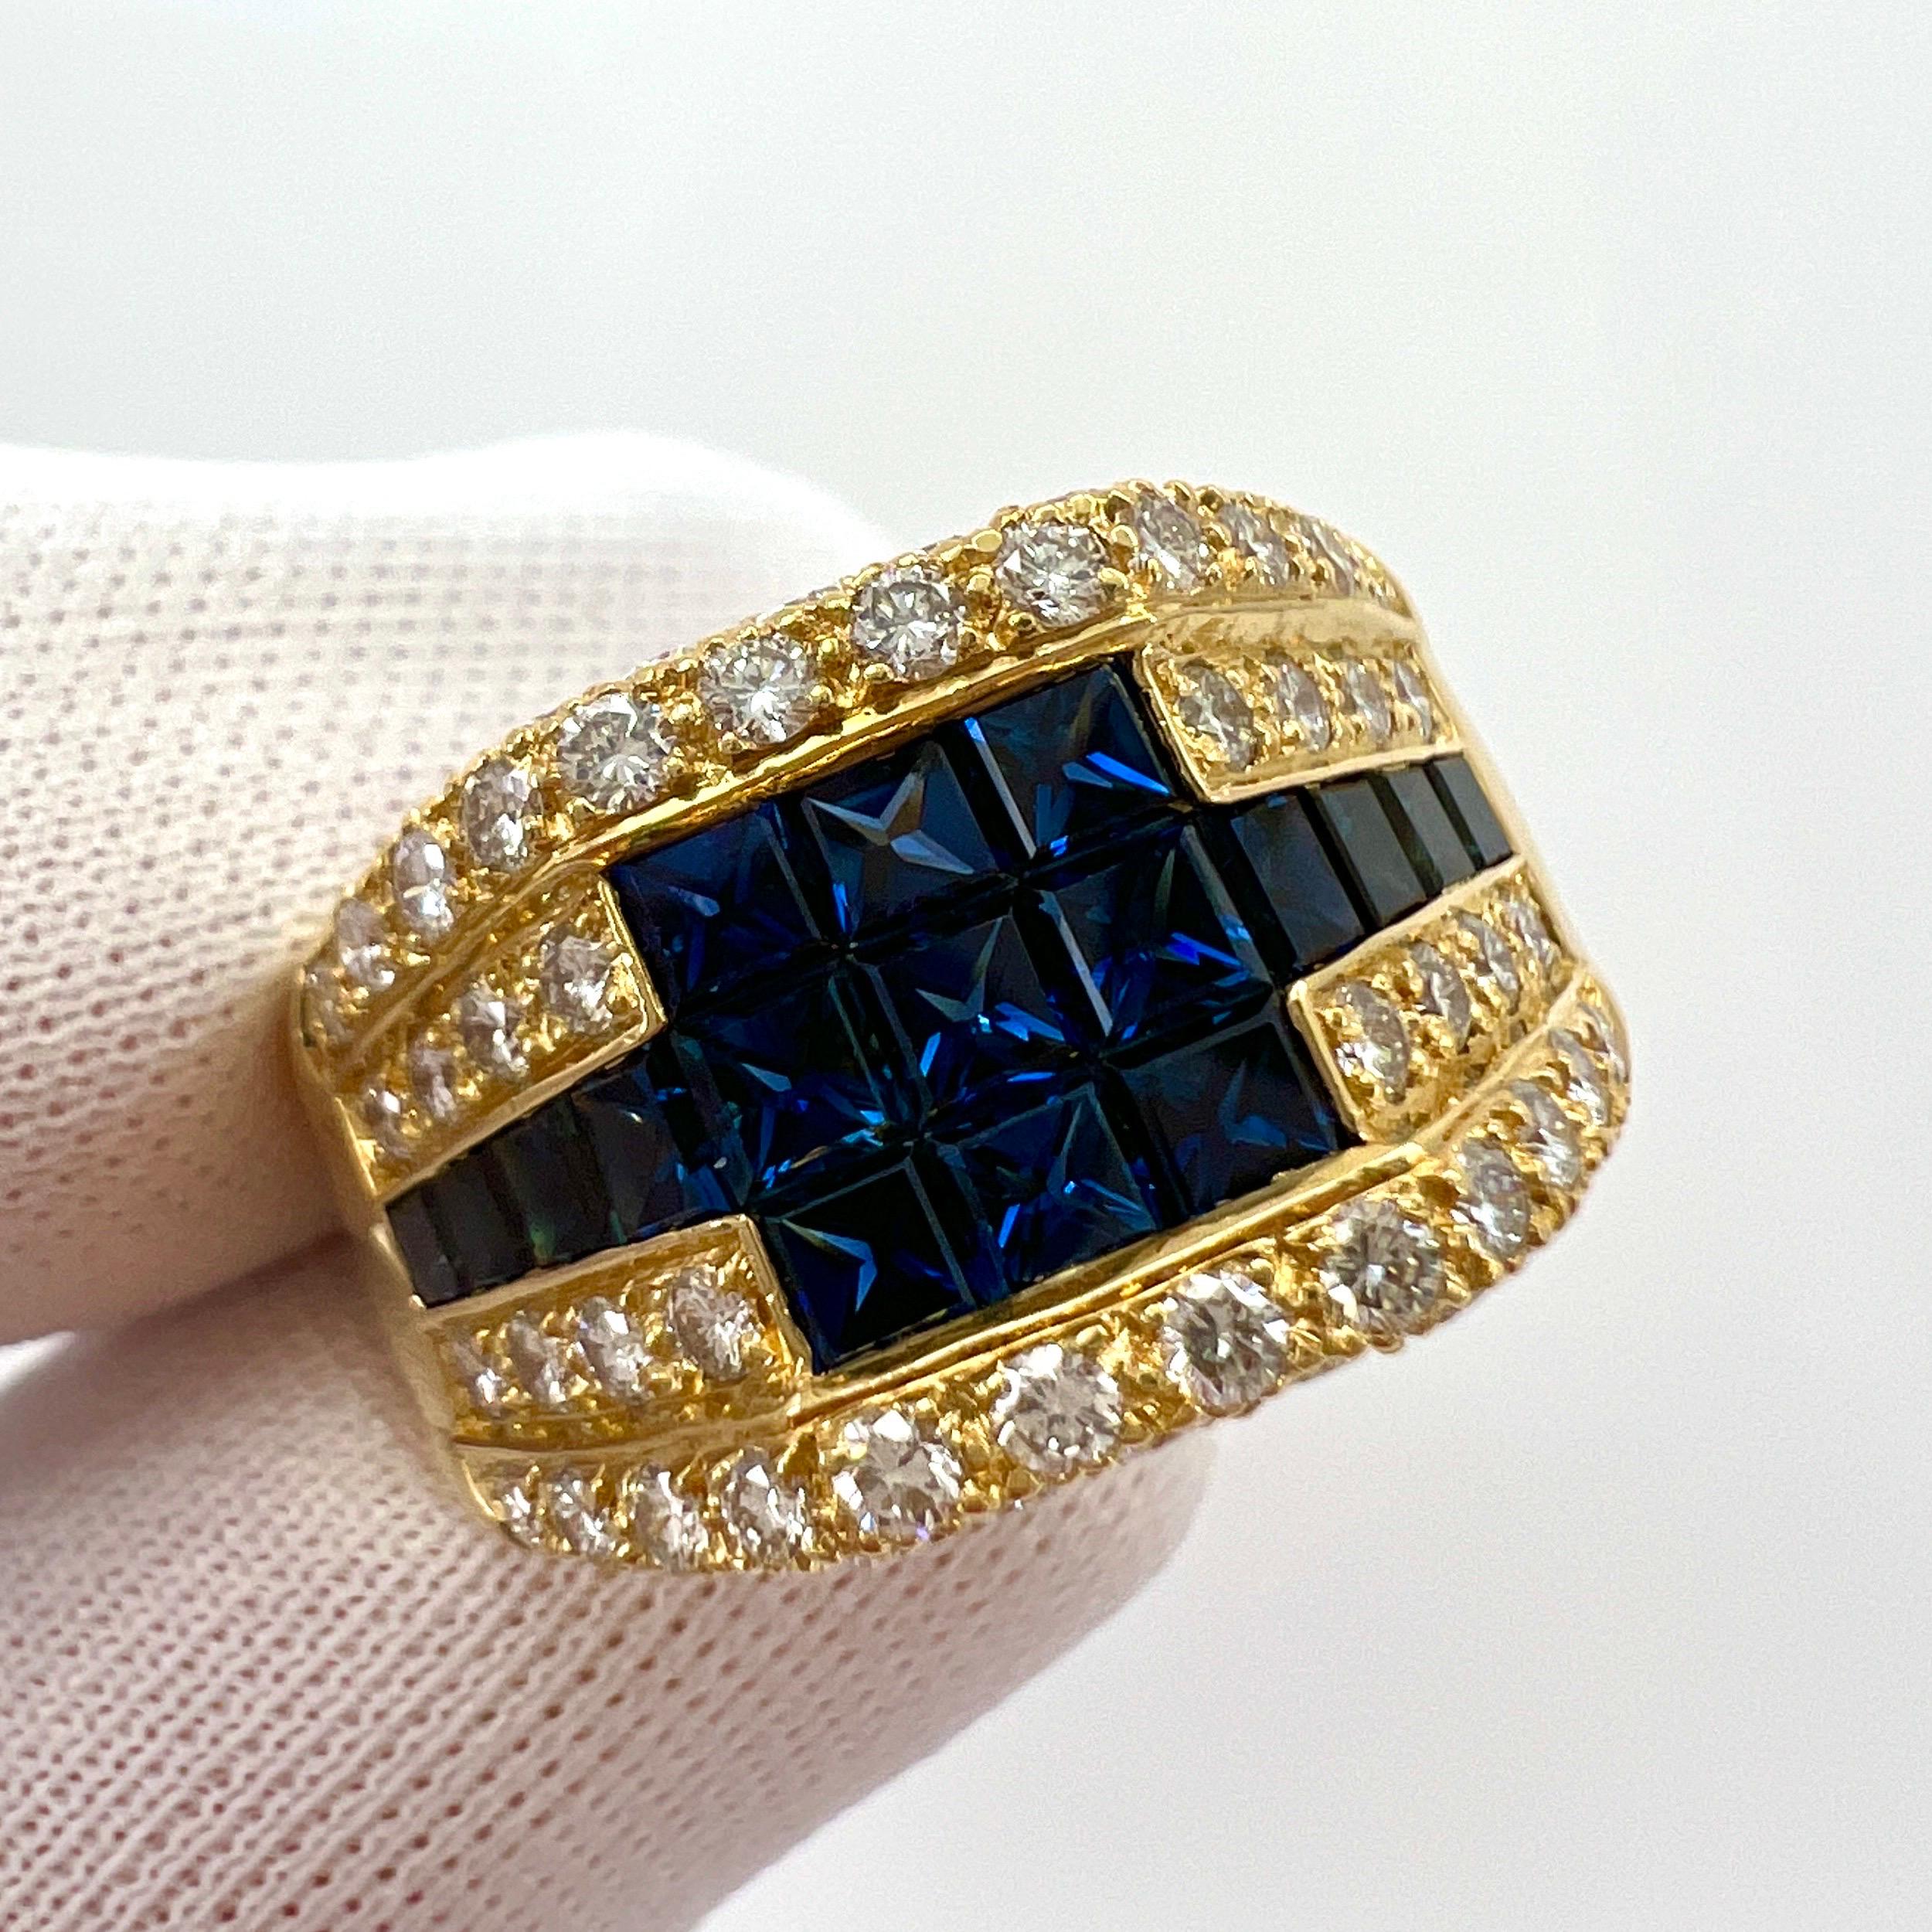 3.80ct Vintage French Mystery Set Blue Sapphire Diamond 18k Yellow Gold Ring For Sale 2